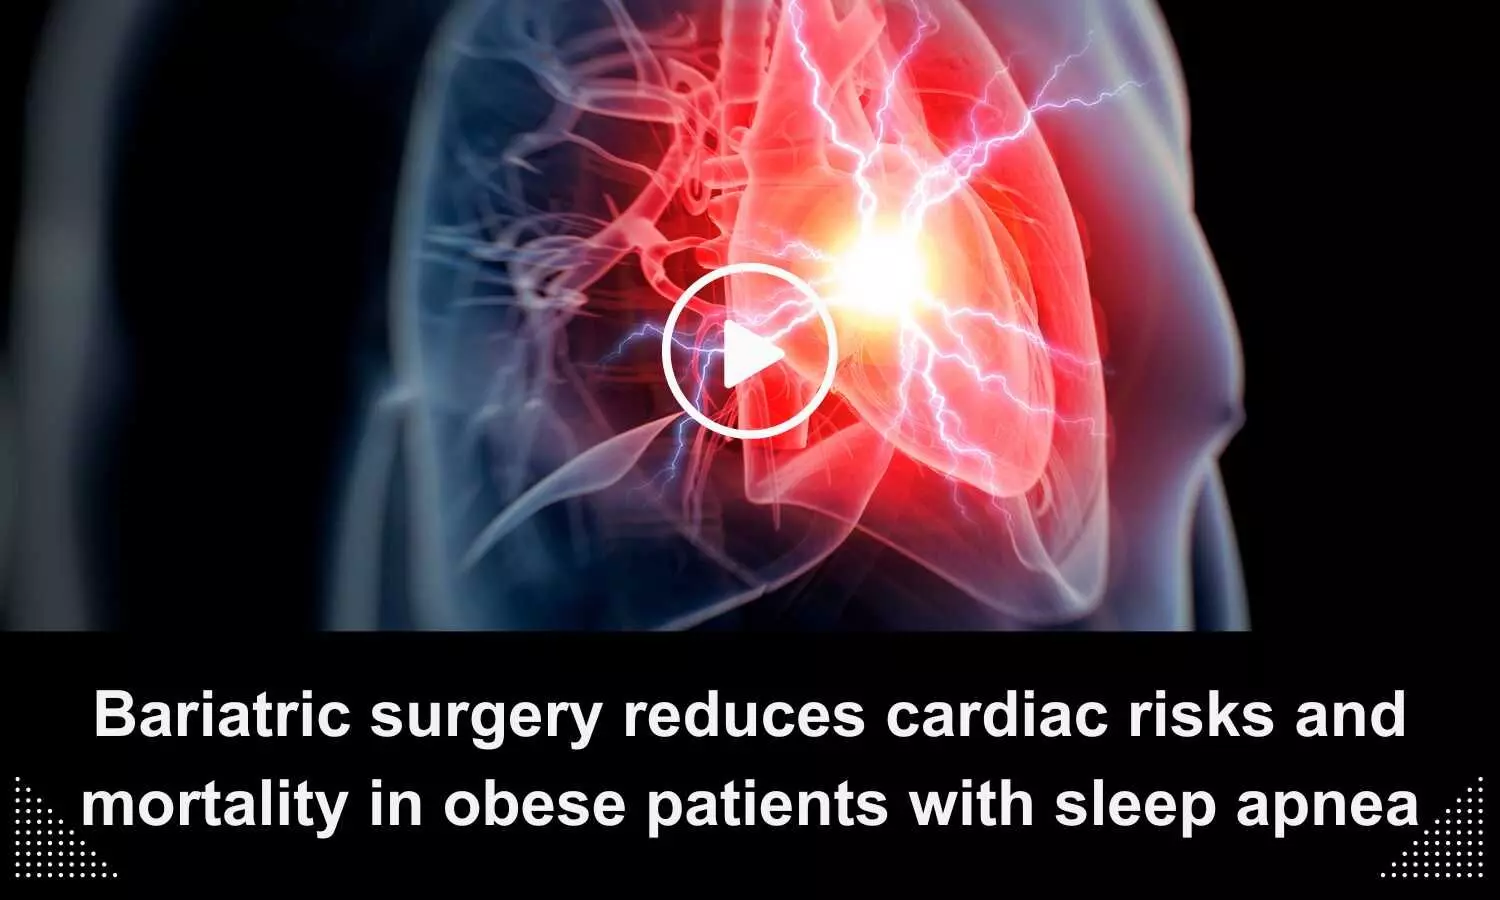 Bariatric surgery reduces cardiac risks and mortality in obese patients with sleep apnea